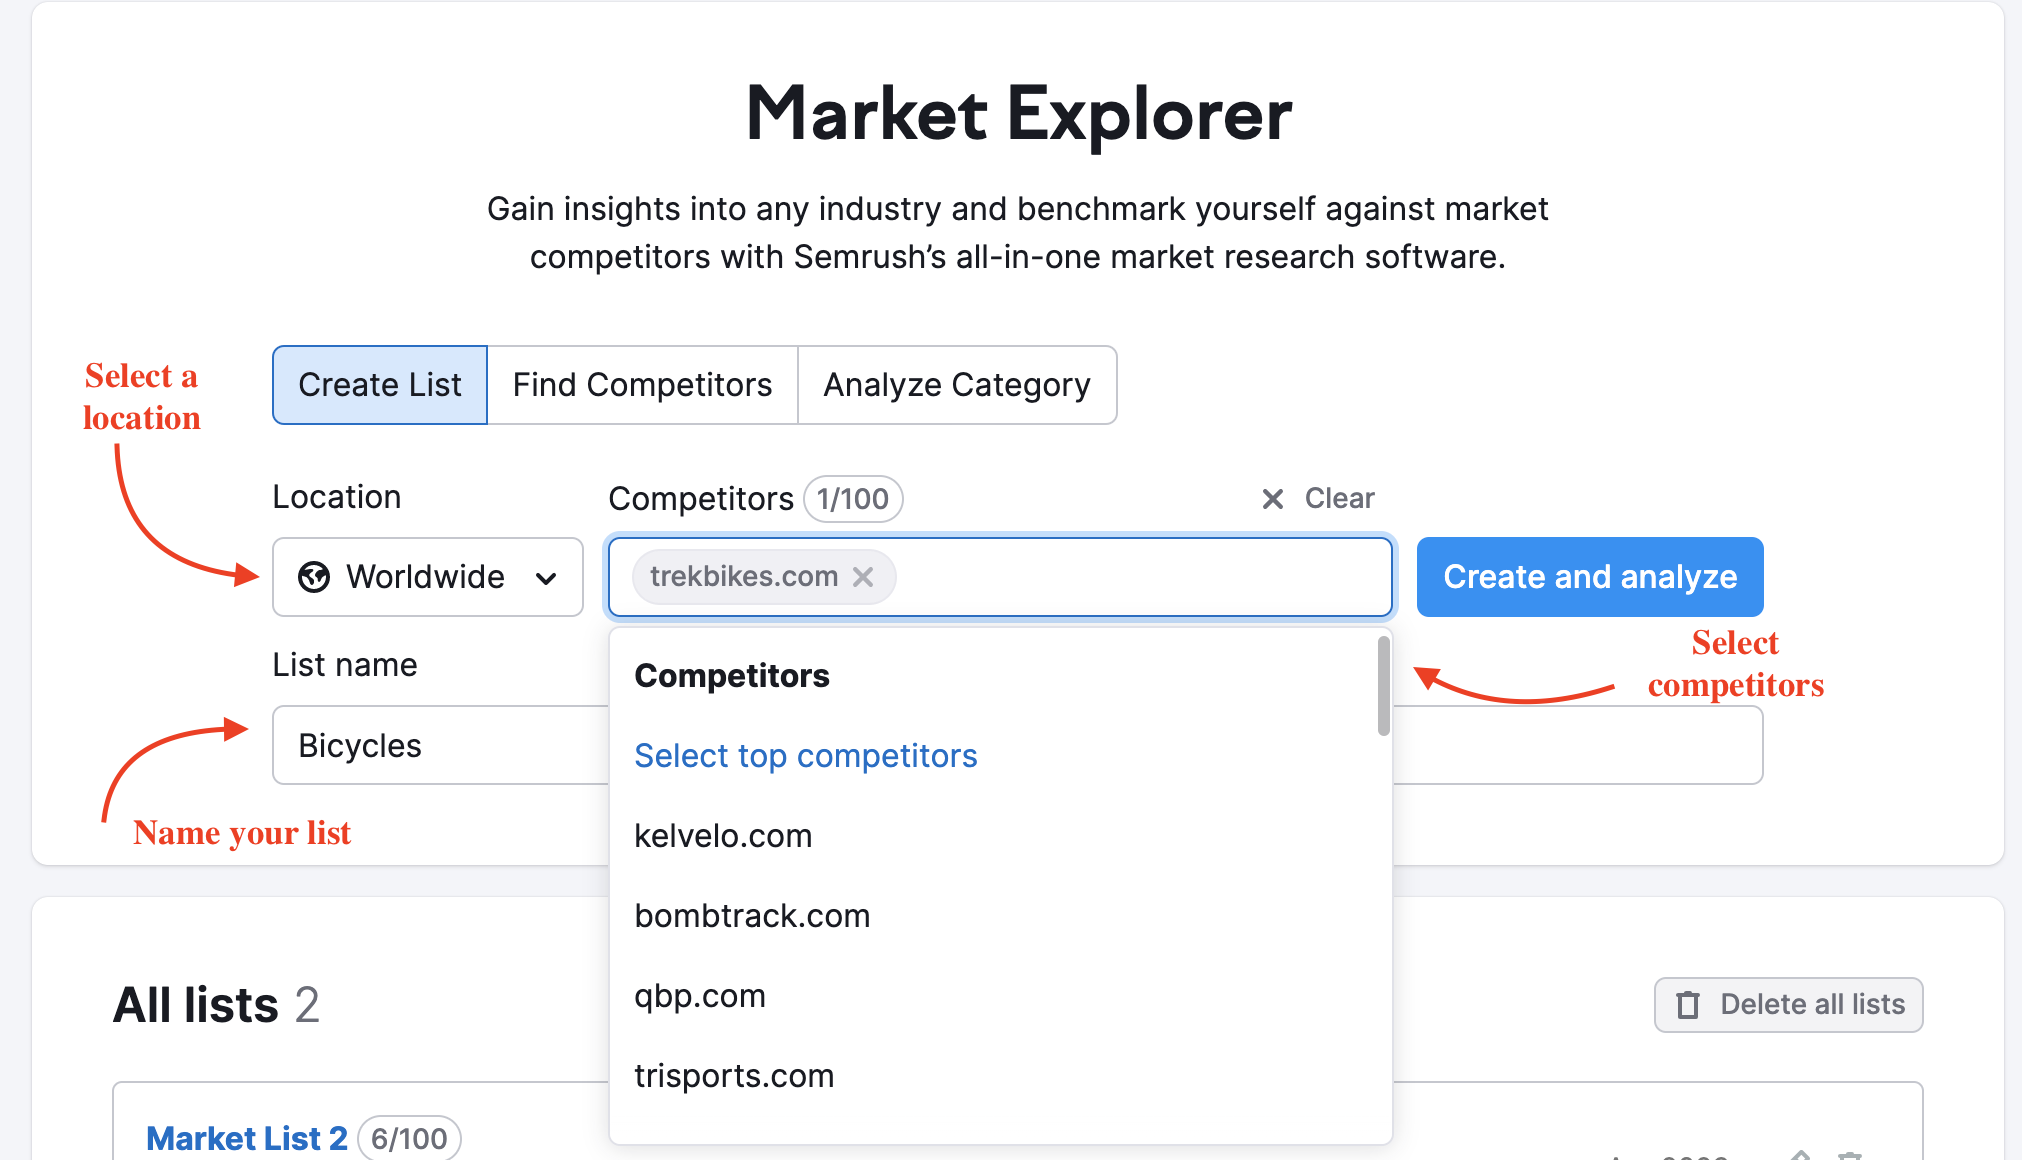 Selecting location, competitors, and a market list's name for a test run of Market Explorer